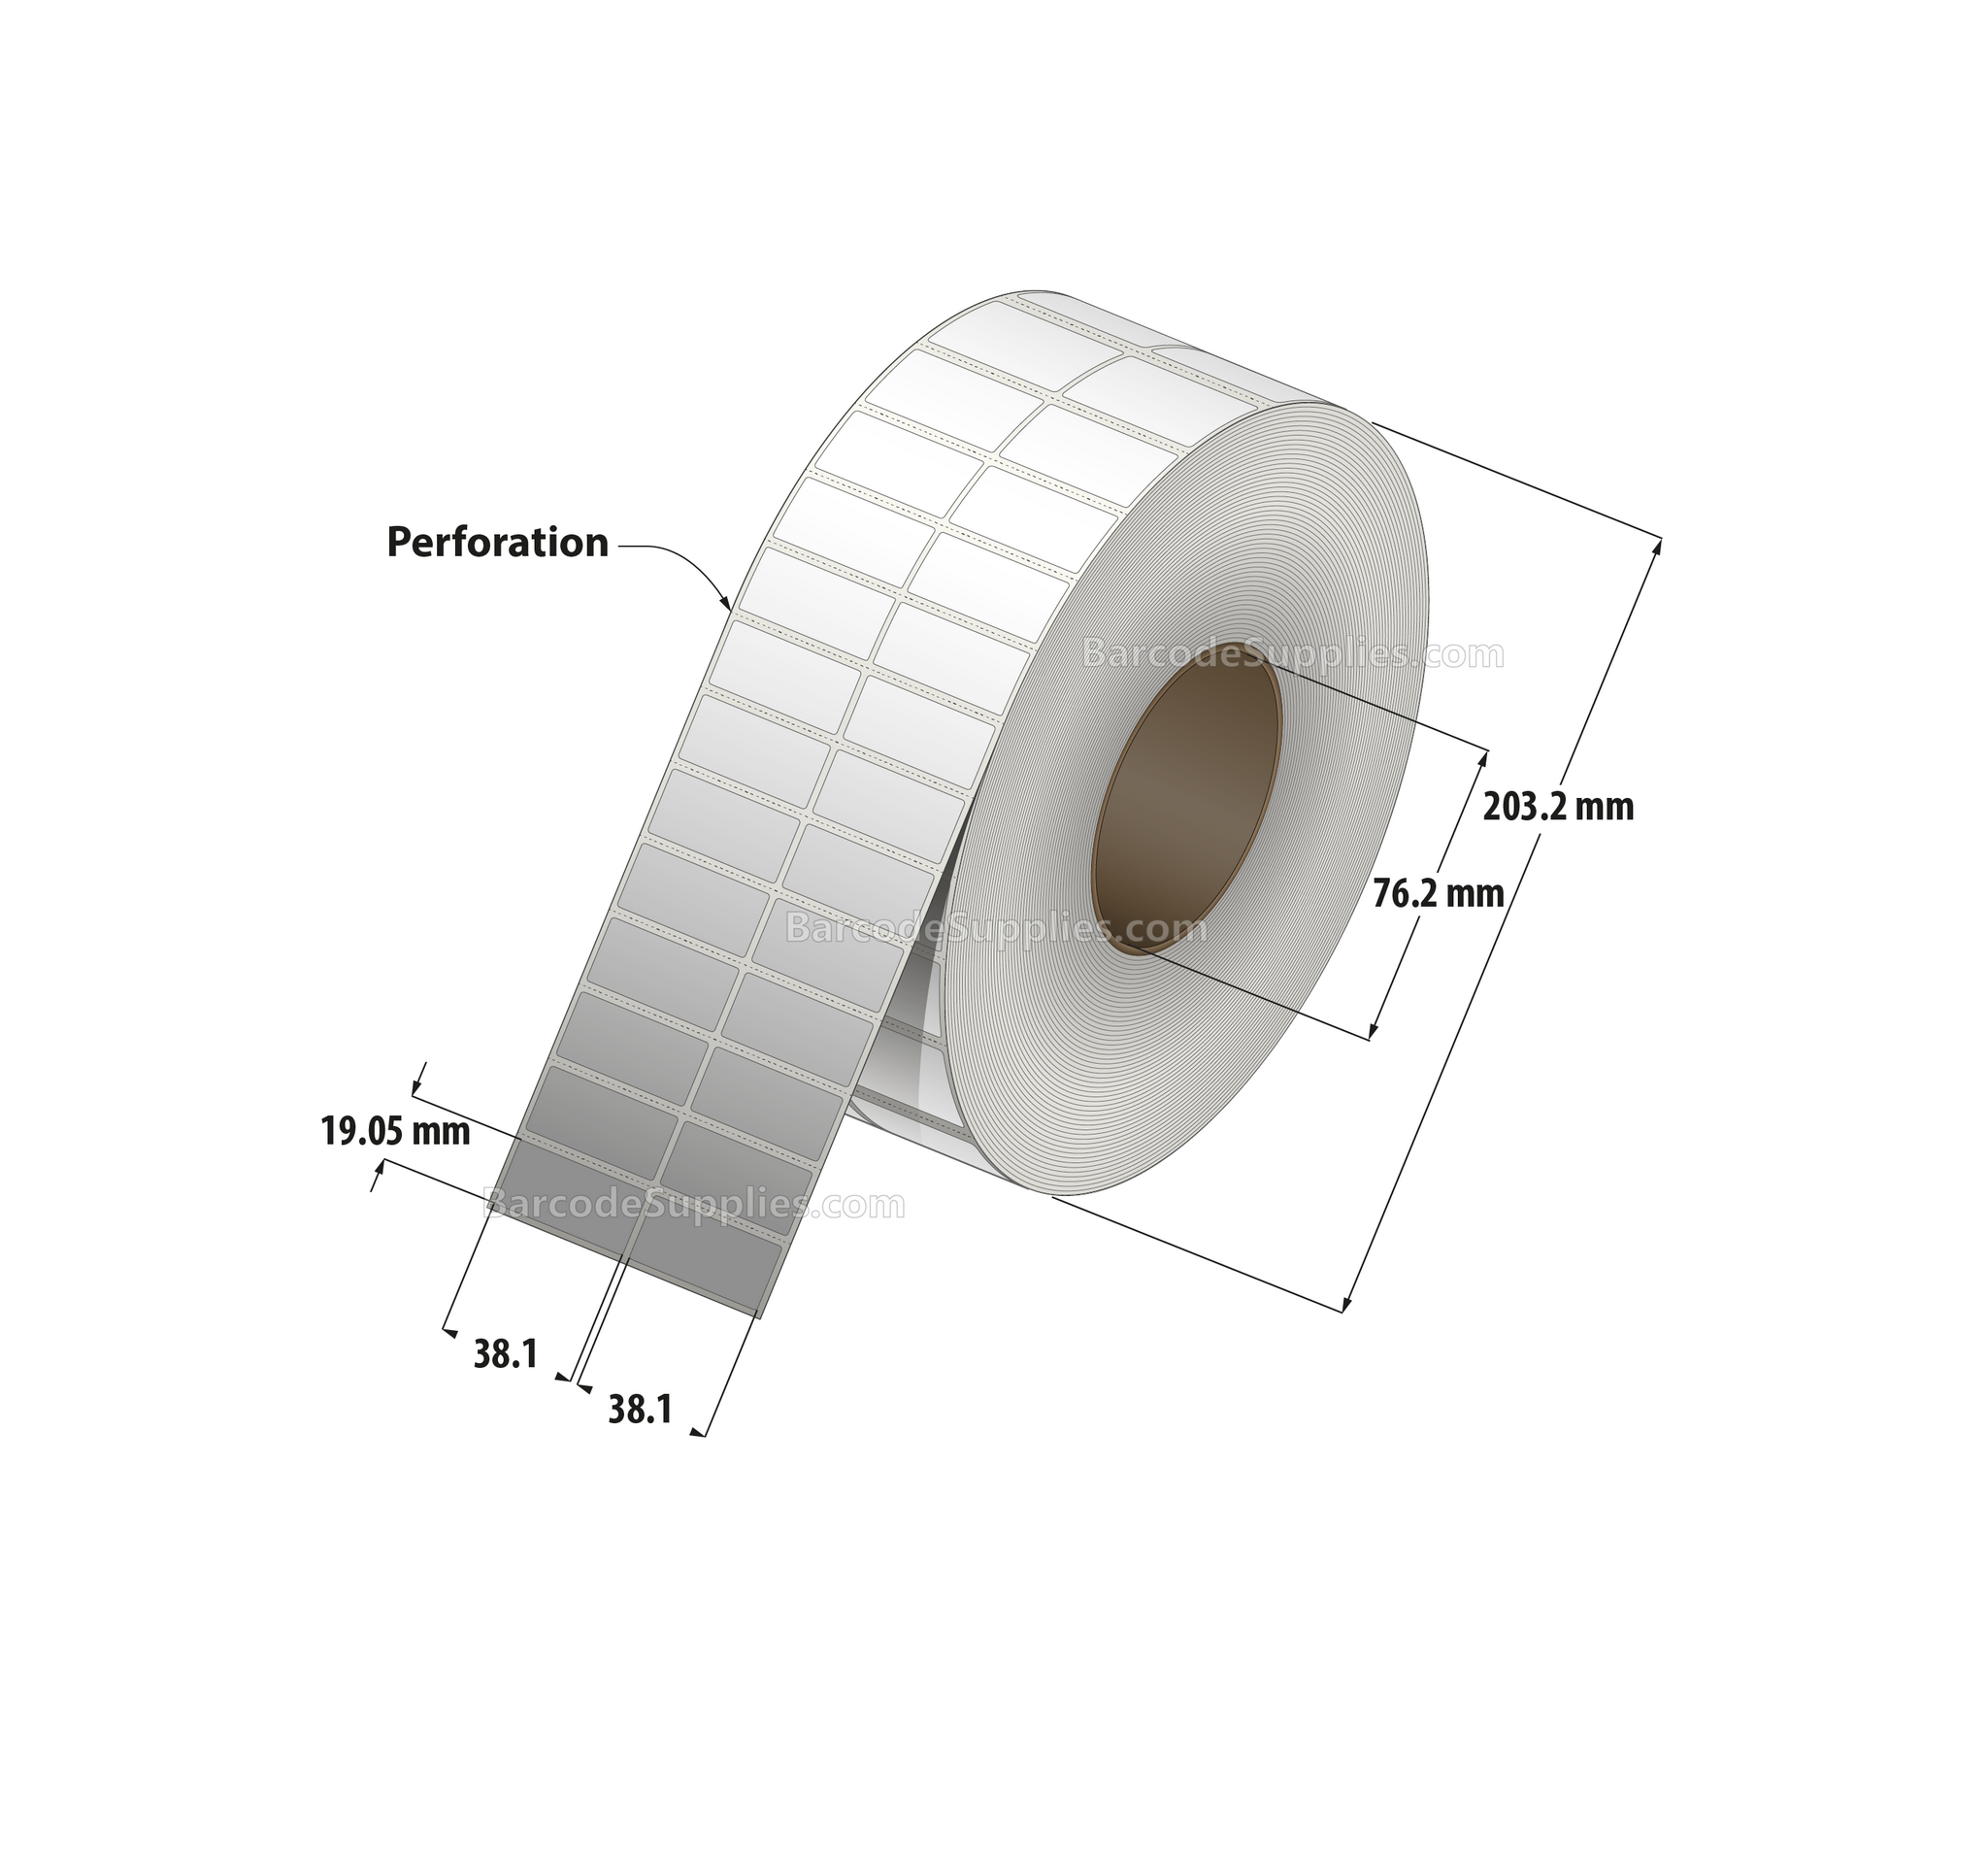 1.5 x 0.75 Thermal Transfer White Labels With Permanent Adhesive - Perforated - 15,000 Labels Per Roll - Carton Of 4 Rolls - 60000 Labels Total - MPN: RP-15-075-15000-3